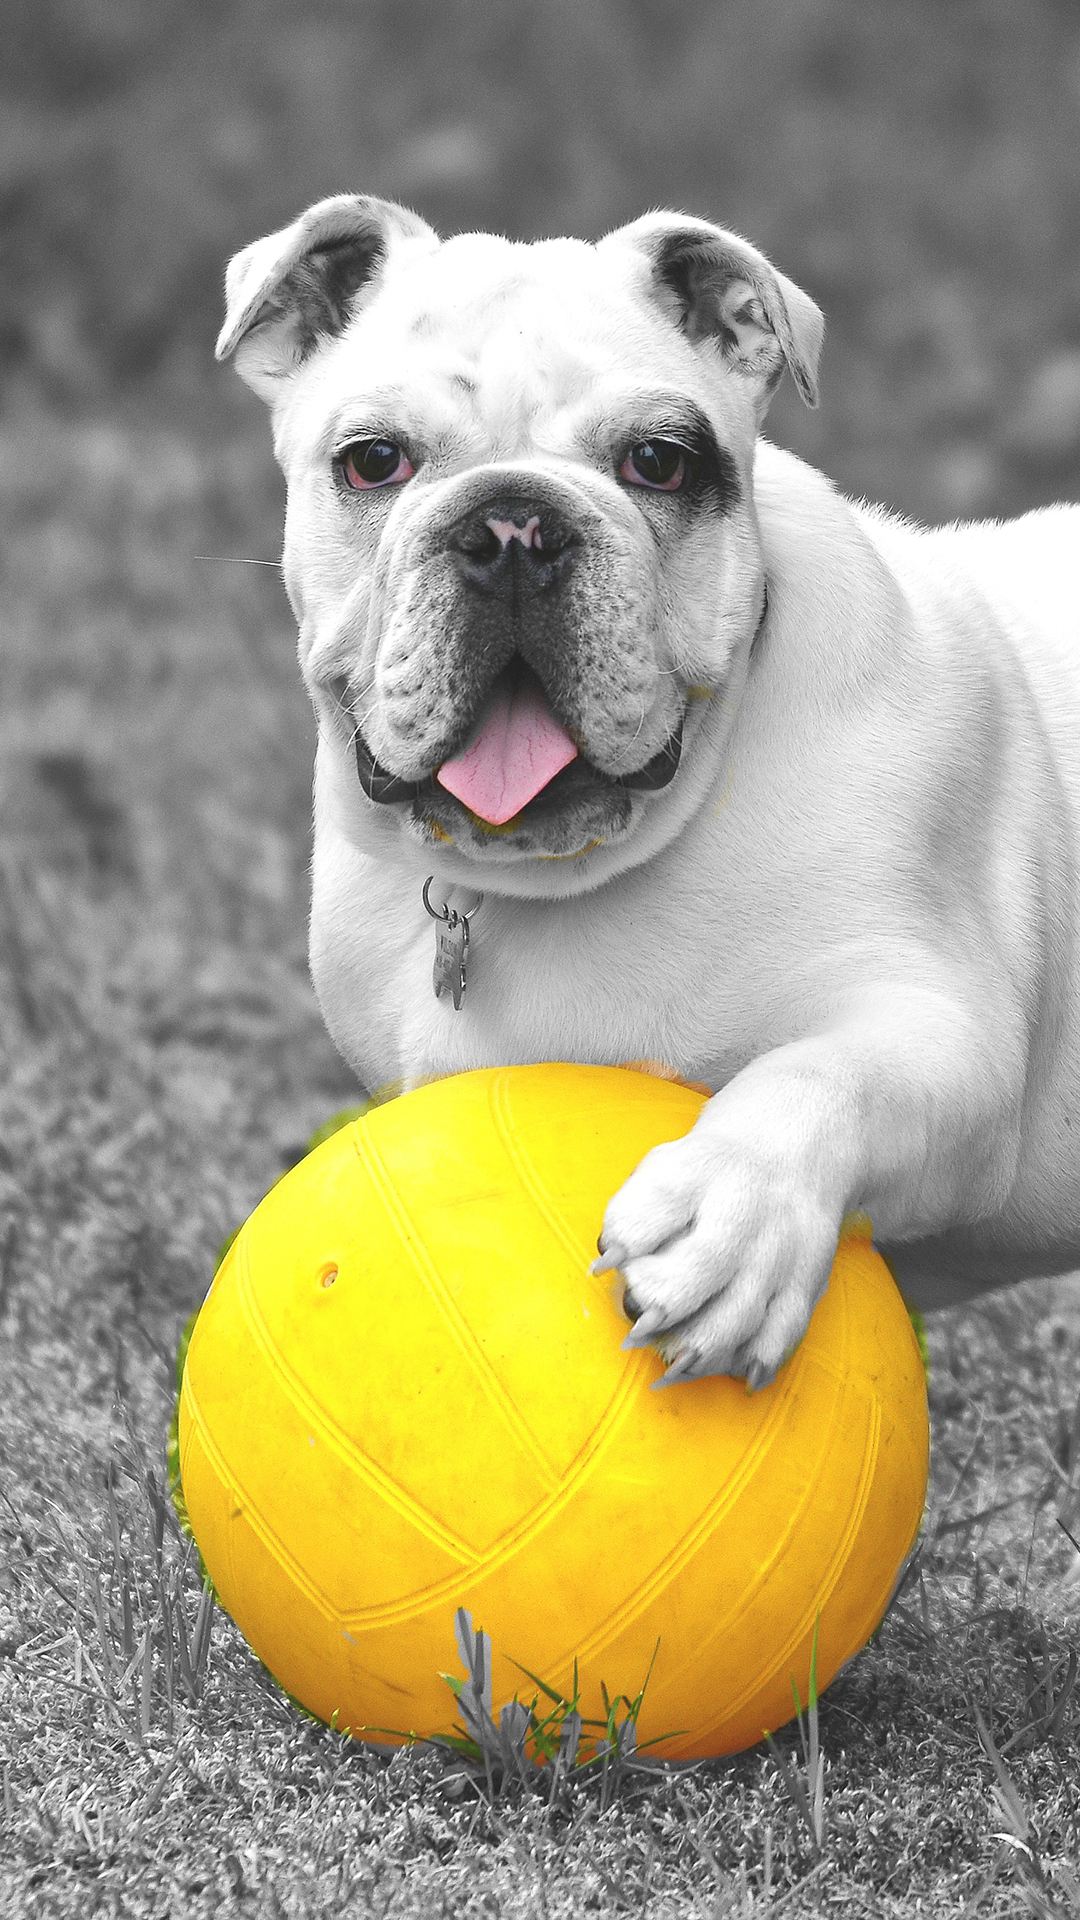 Bulldog HD Wallpaper For Your Mobile Phone